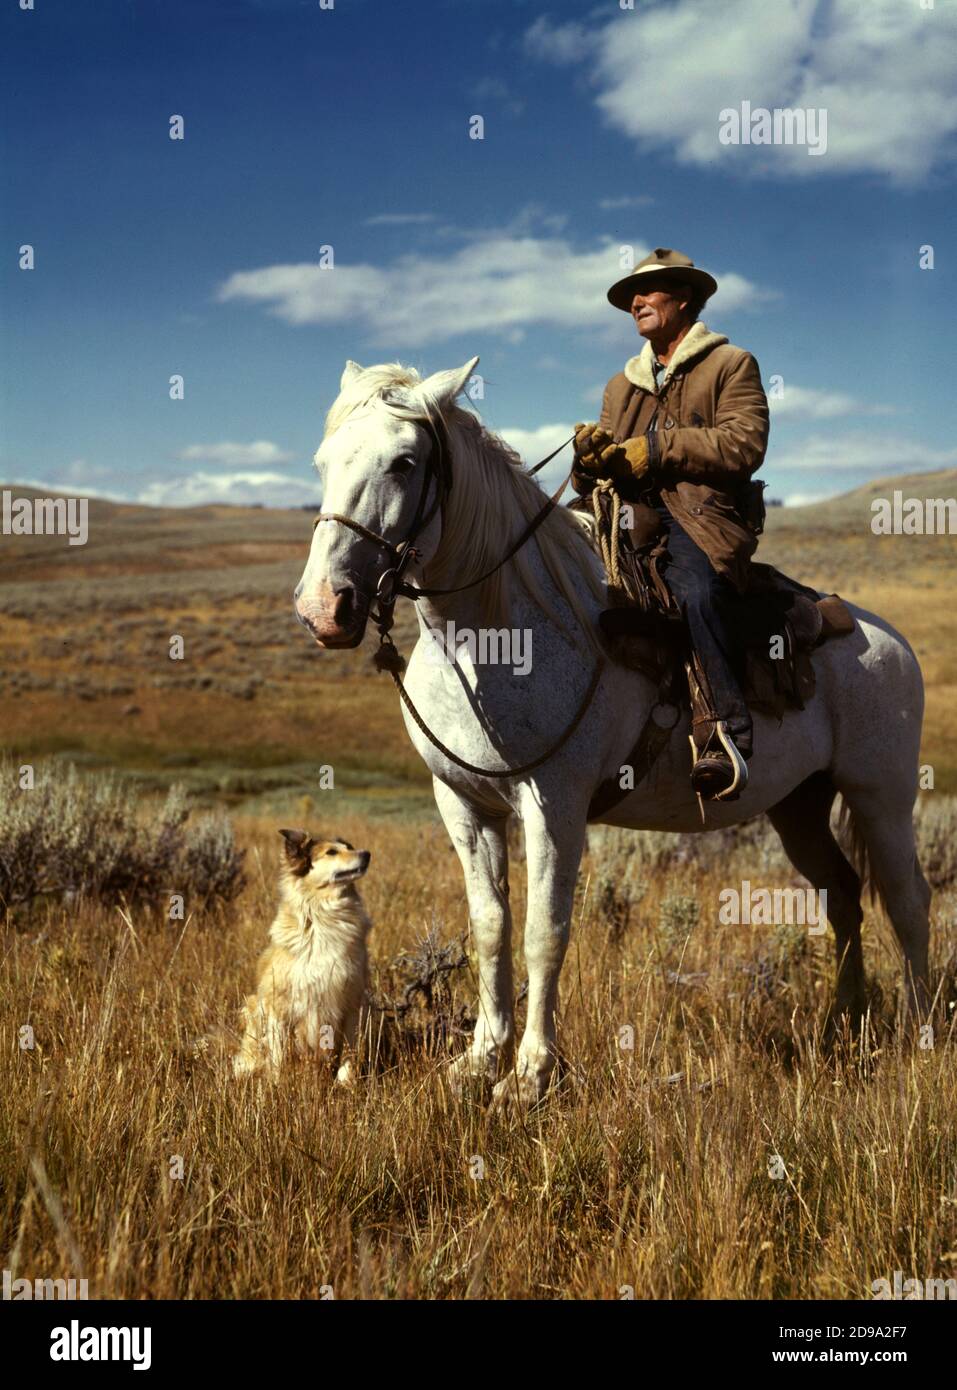 1942 , august , MONTANA , USA : Shepherd with his horse and dog on Gravelly Range, Madison County, Montana .  Photo by american Russell LEE ( born  1903 ) for the Unired Stated U.S. Office of War Information - photographer .- UNITED STATES  - FOTO STORICHE - HISTORY - GEOGRAFIA - GEOGRAPHY - AGRICOLTURA - AGRICOLTORI - ALLEVATORI di BOVINI - ALLEVAMENTO BOVINO - COW - cowboy - CONTADINI  -  CONTADINO - cattle - cane da pastore - pet  - ANNI QUARANTA - 1940's - 40's - '40 - campagna - country - cavallo - horse - sky - cielo  -    ----   Archivio GBB Stock Photo